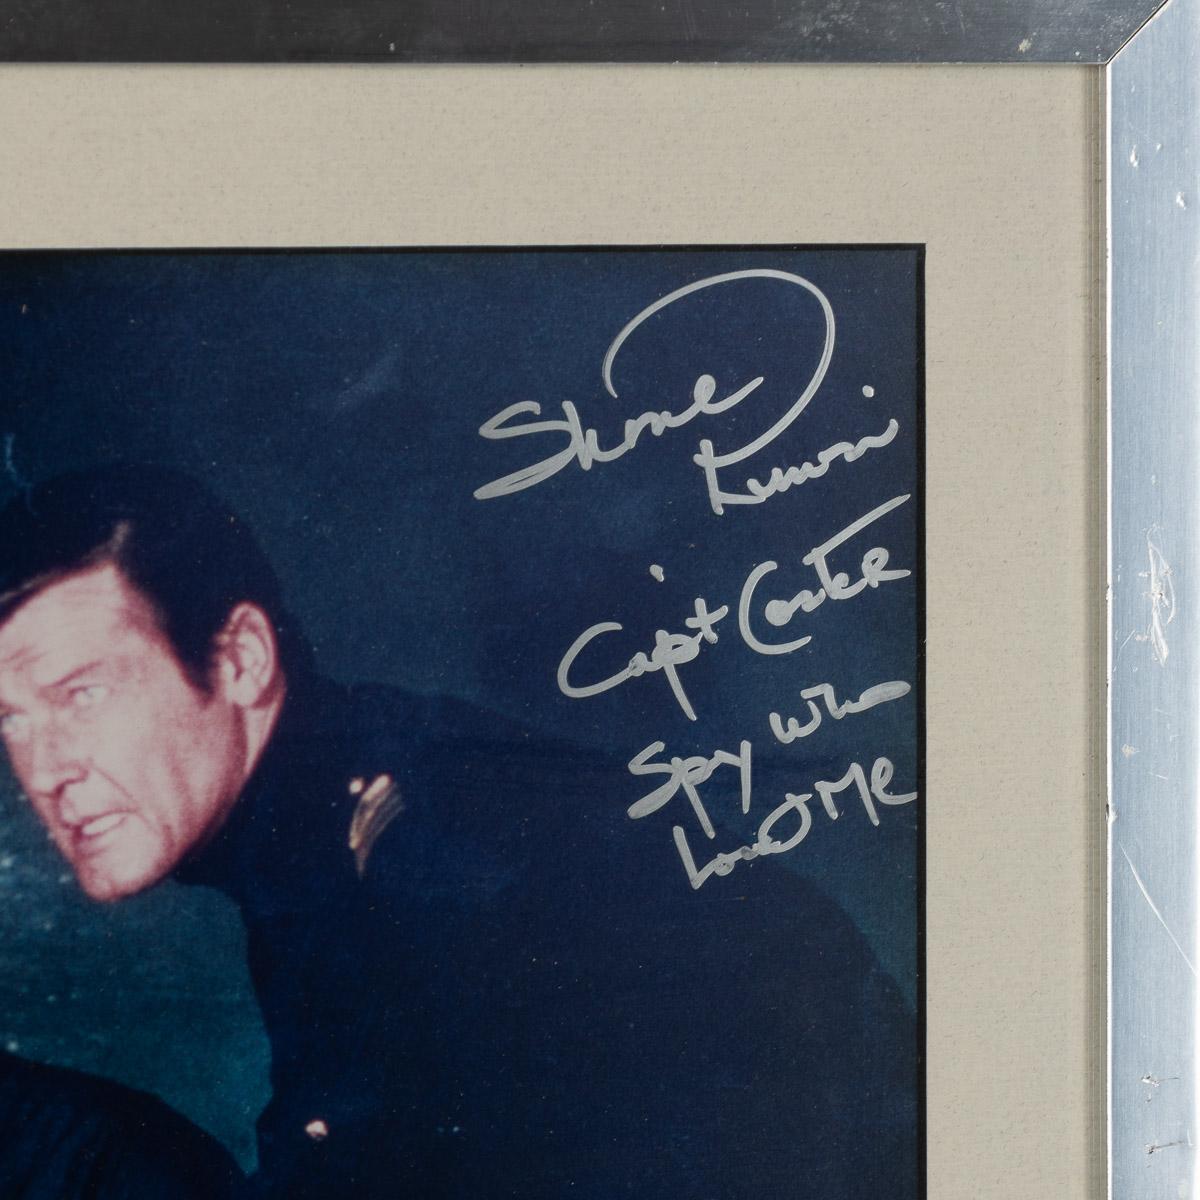 A rare signed photograph by Shane Rimmer & miniature movie poster. Shane Rimmer was a versatile actor known for his brief but memorable appearance in the James Bond film series. He played the role of Commander Carter, a U.S. Navy submarine captain,